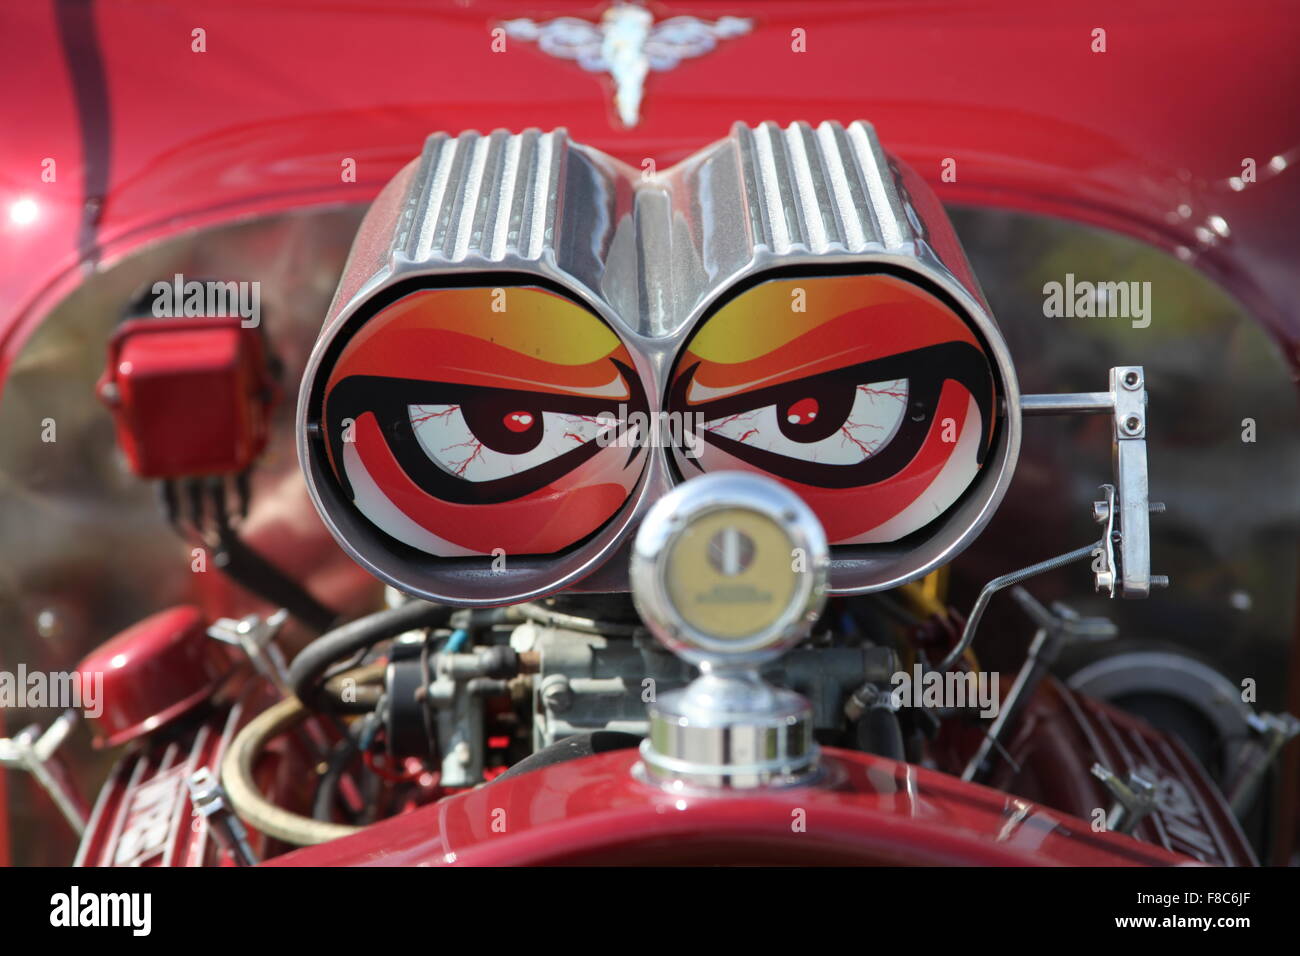 BLOWER ON TOP OF ENGINE PAINTED WITH EYES Stock Photo